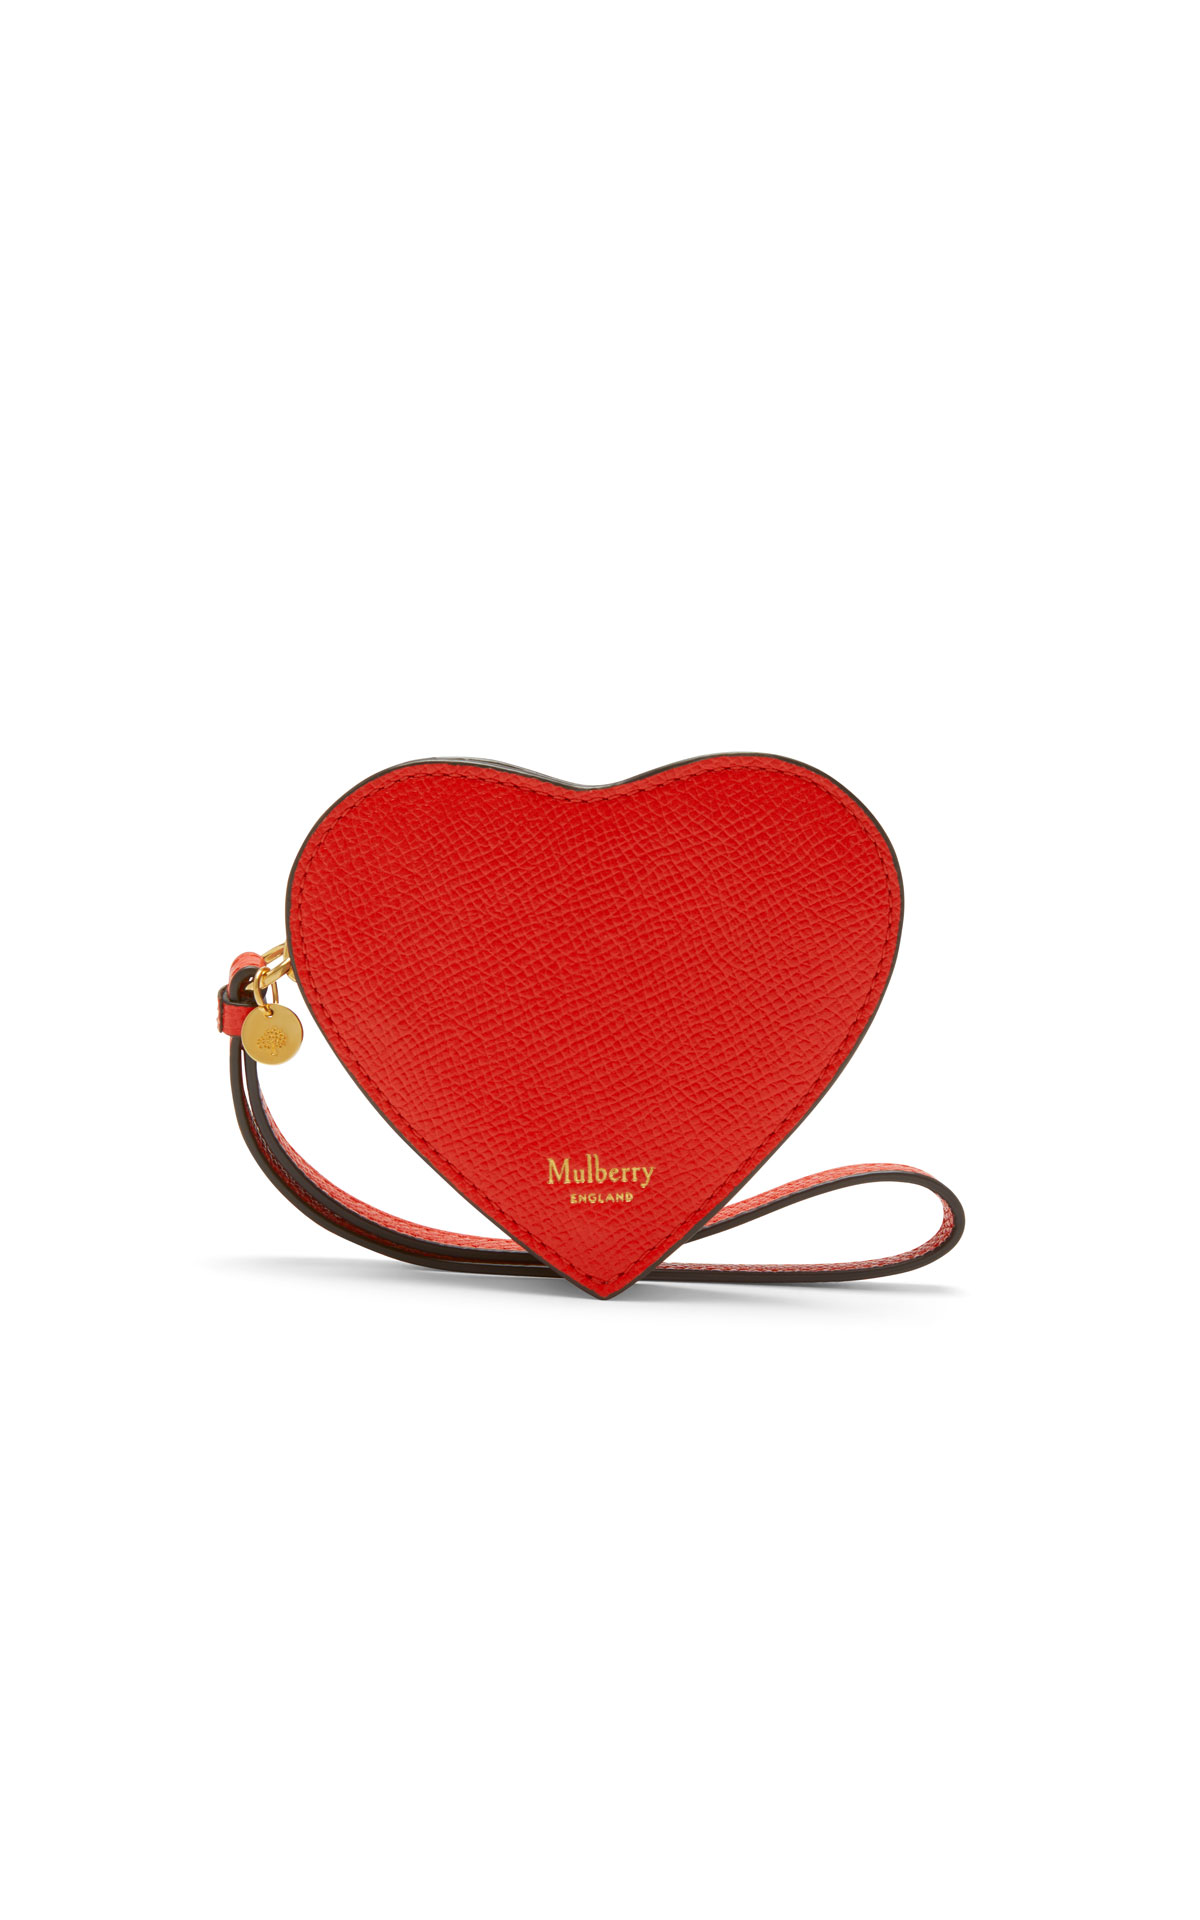 Mulberry Valentines heart purse  from Bicester Village